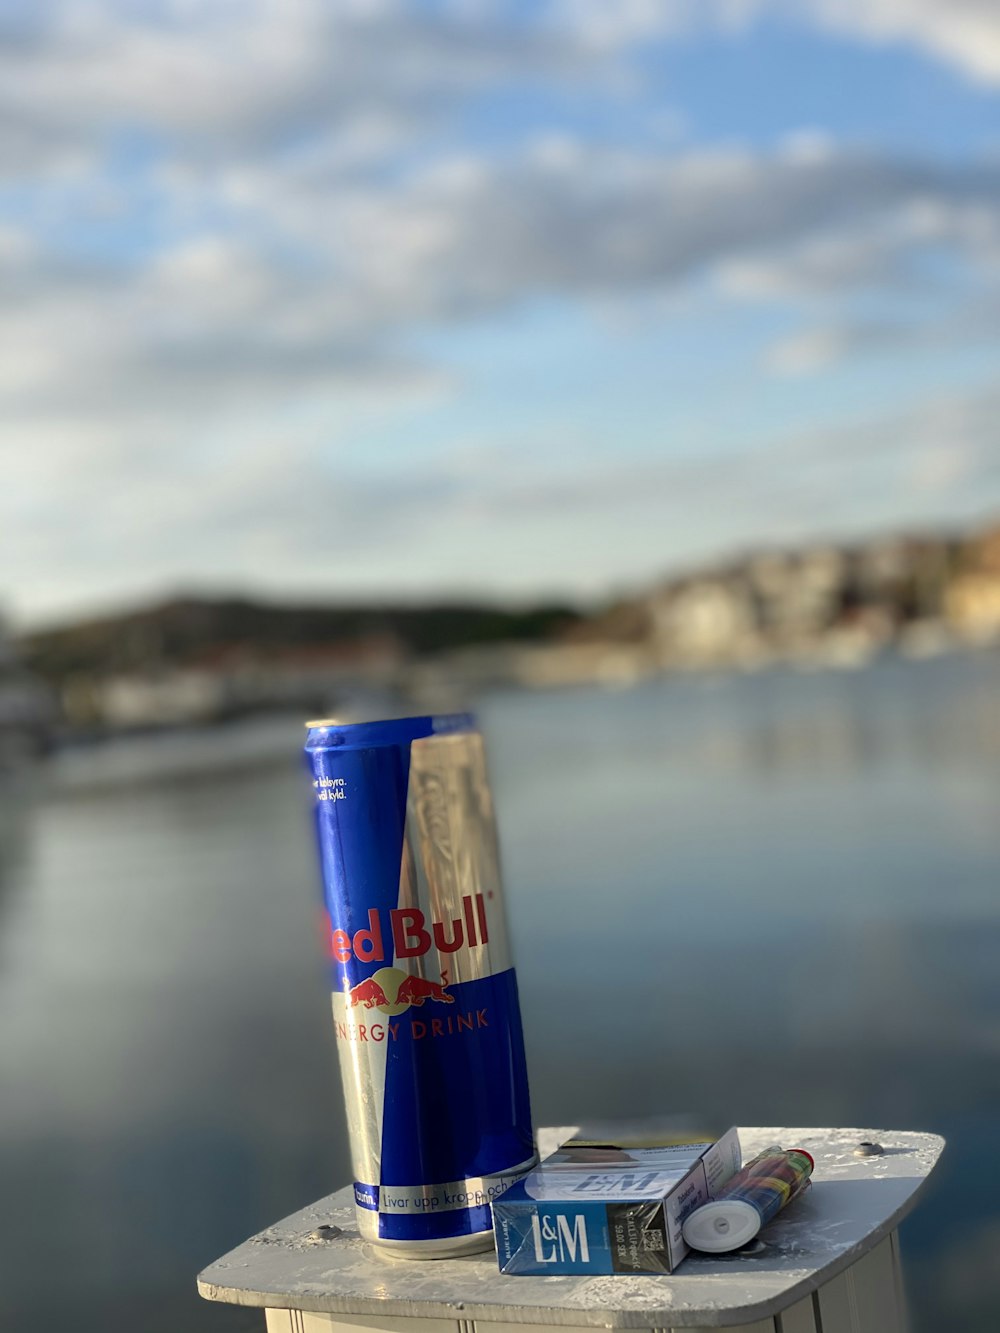 red bull energy drink can on white wooden table